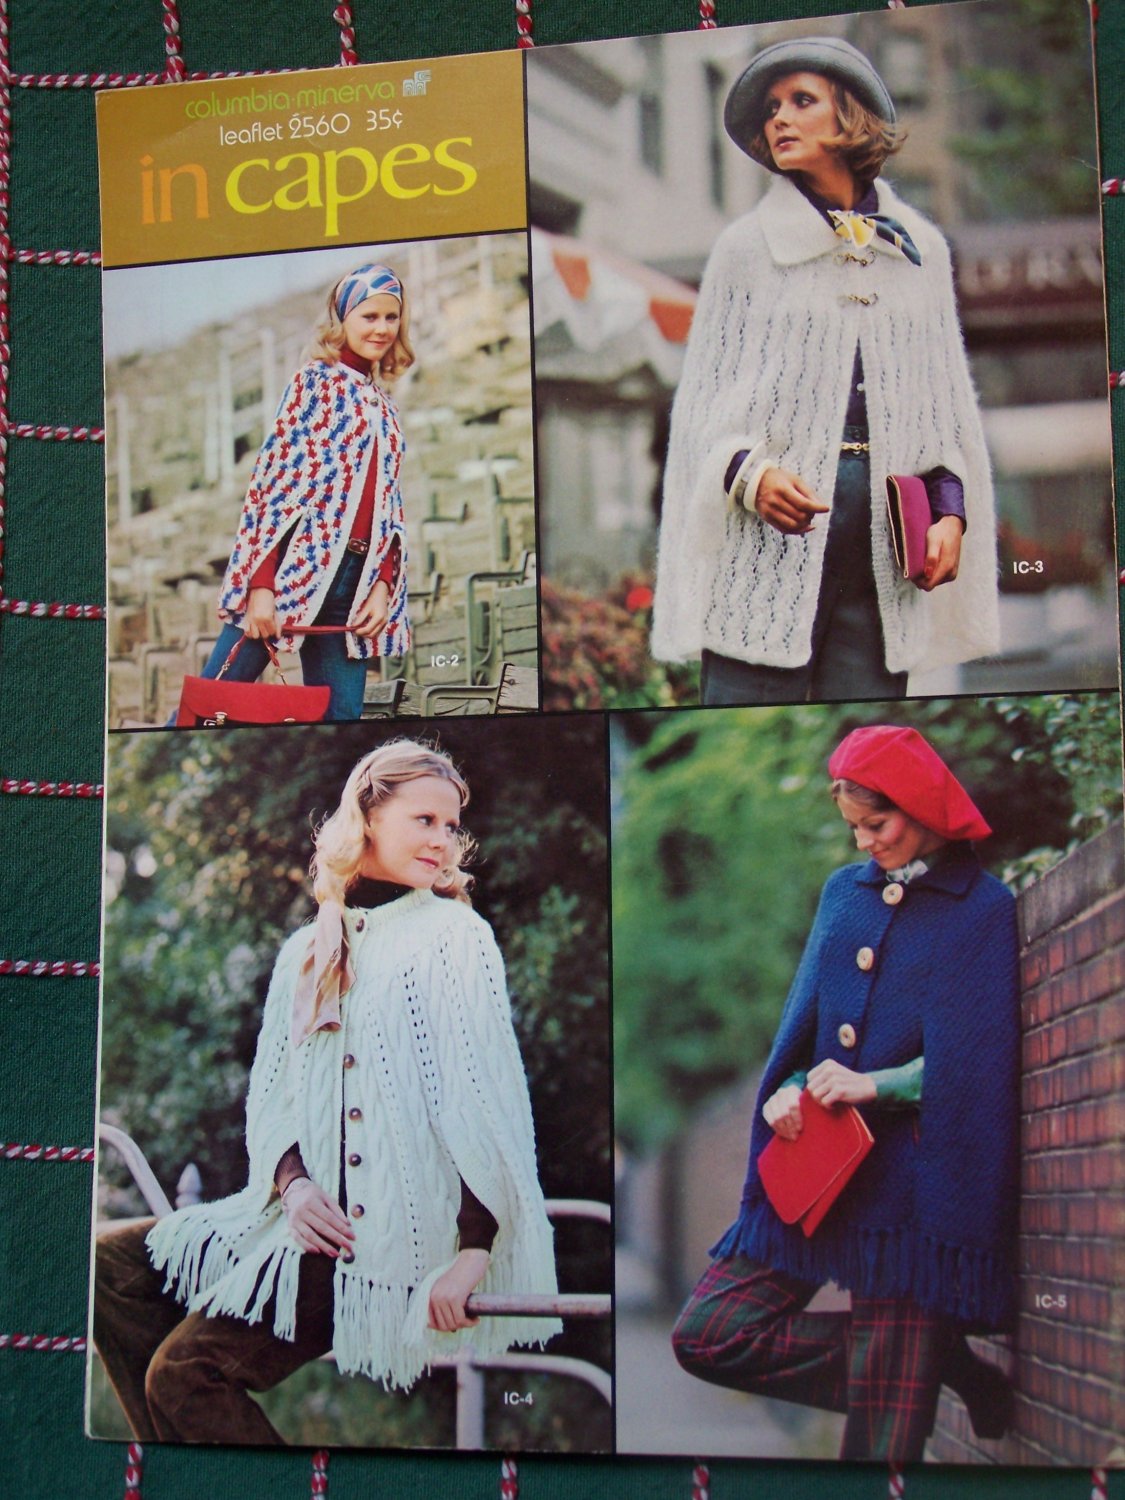 1970 S Vintage Capes For Women Knitting And Crochet Patterns 2560